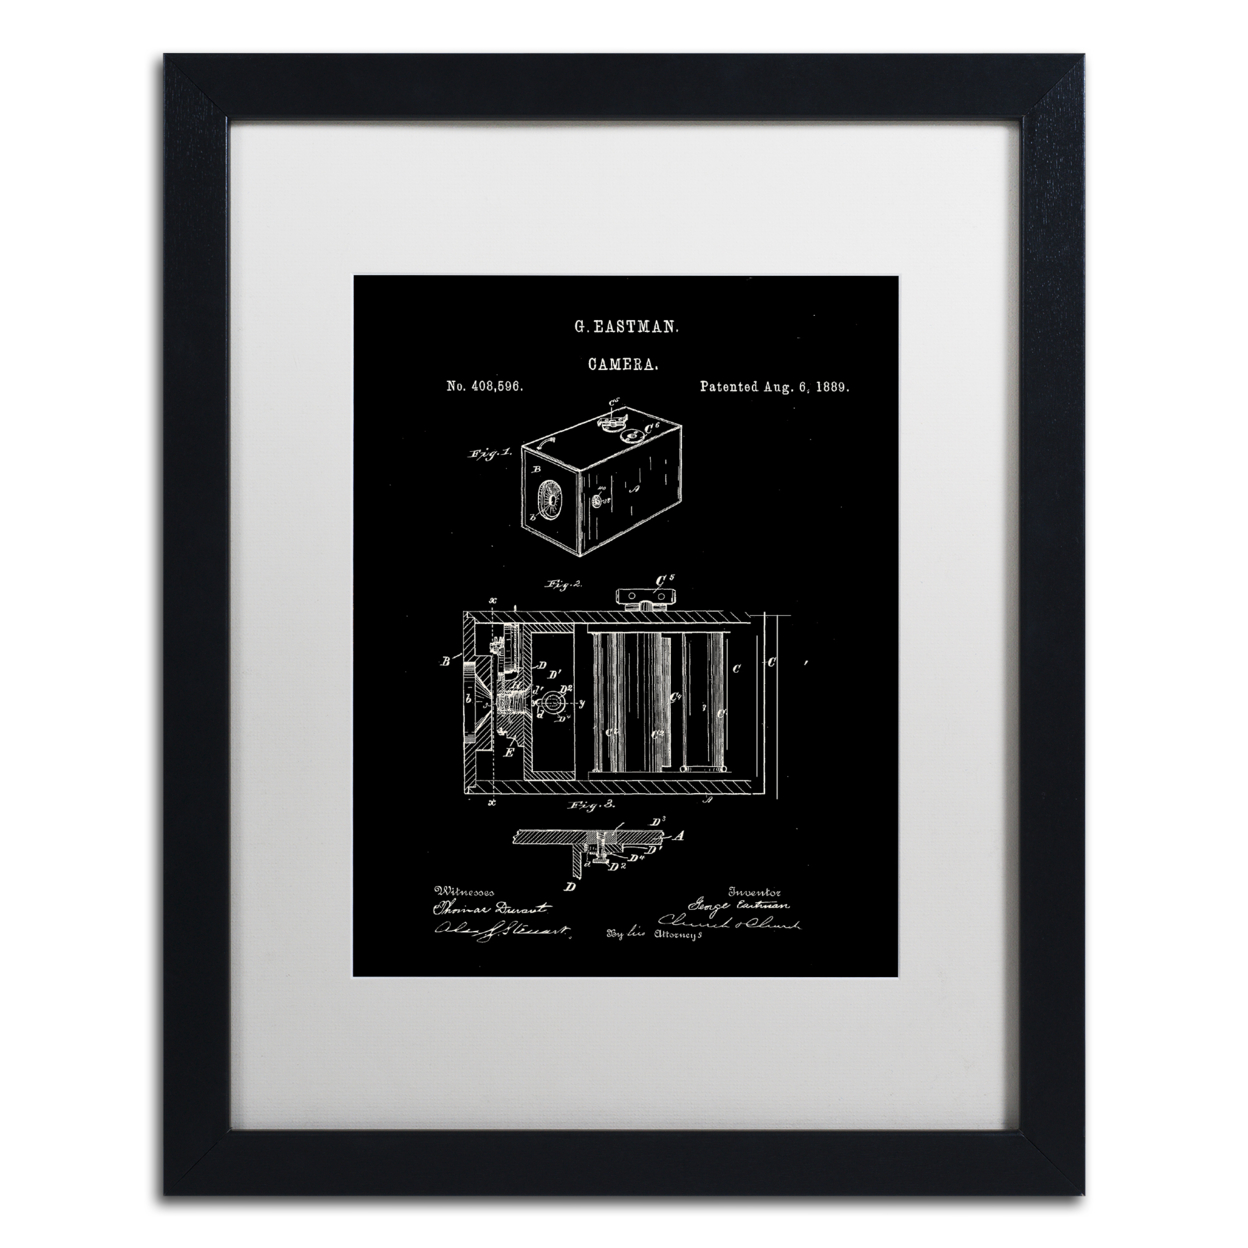 Claire Doherty 'George Eastman Camera Patent Black' Black Wooden Framed Art 18 X 22 Inches